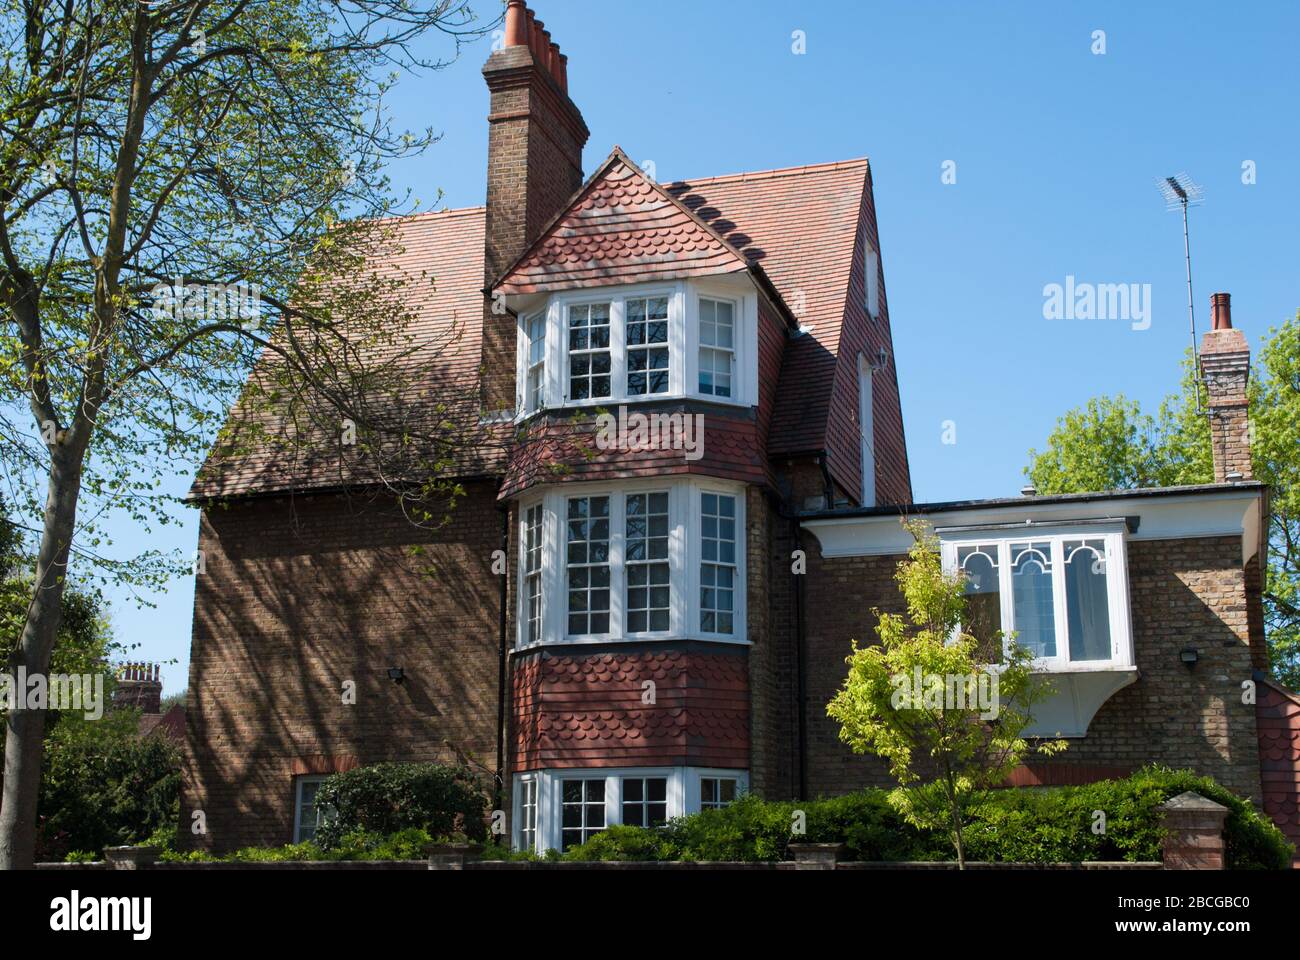 Queen Anne Revival Architecture Richard Norman Shaw Garden Suburb Woodstock Road, Turnham Green, Chiswick, London, W4 1DS Stock Photo